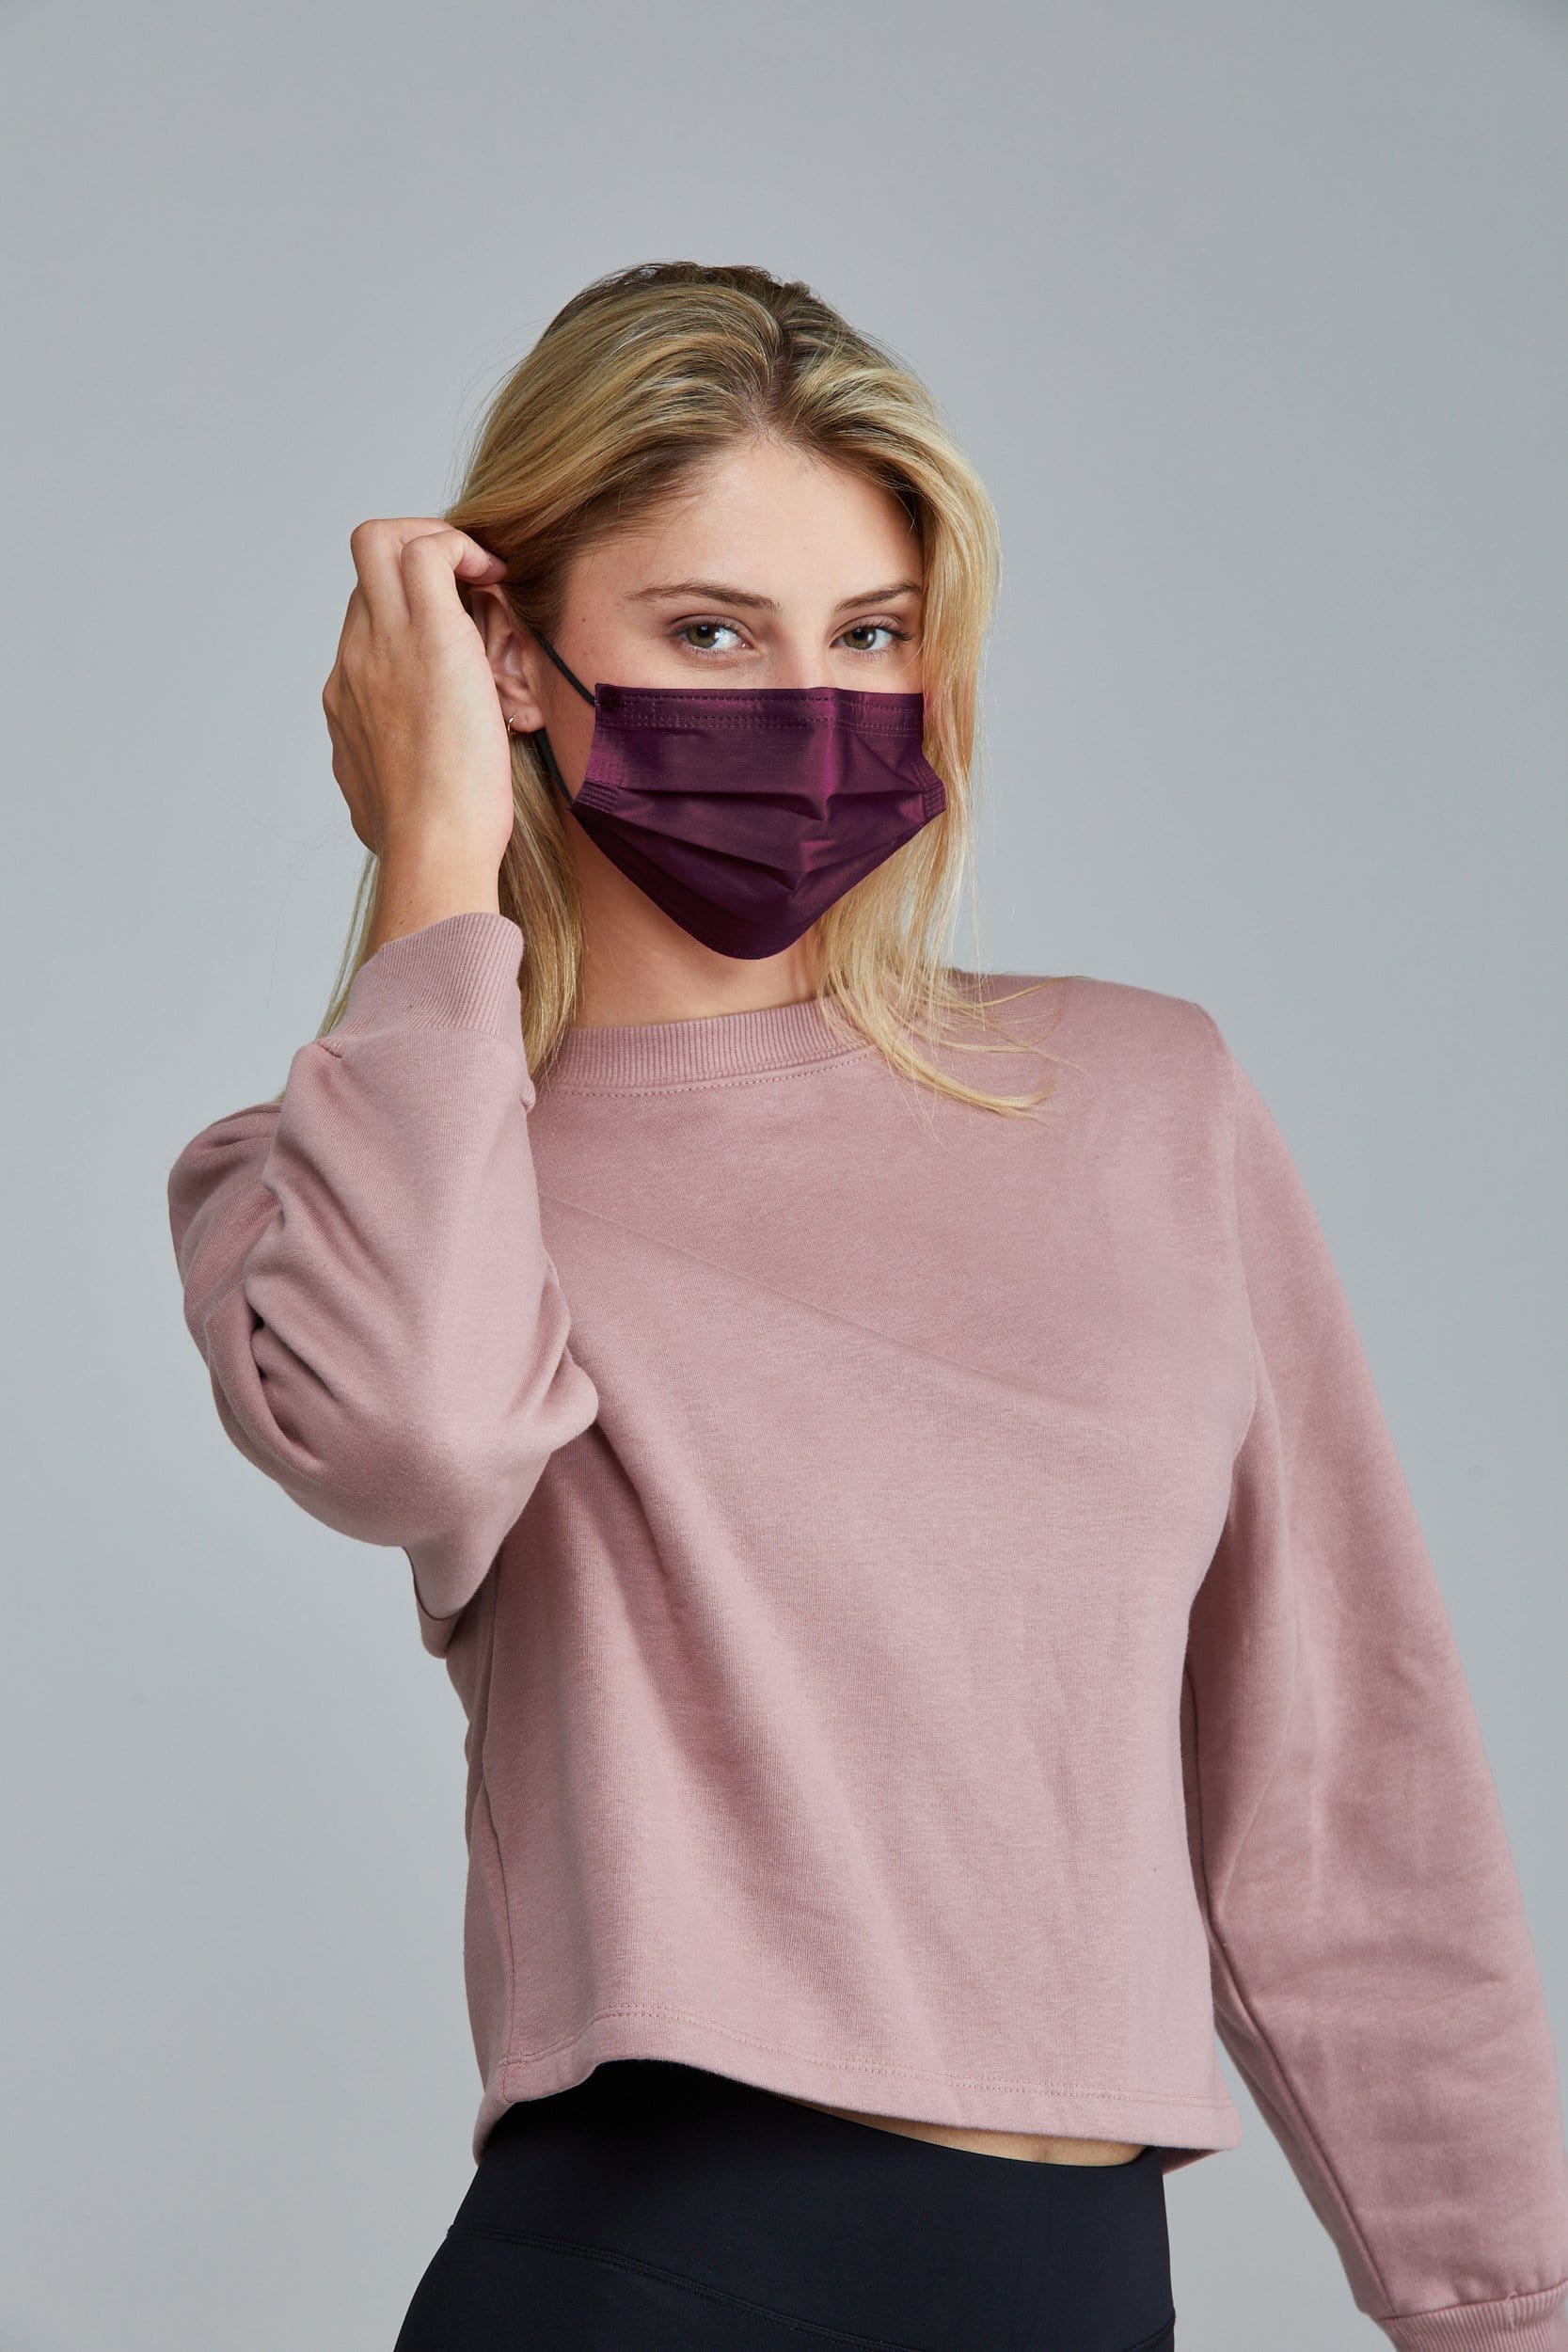 Woman wearing stylish Burgundy colored Pleated face mask, with three layers & high quality breathable fabric. 